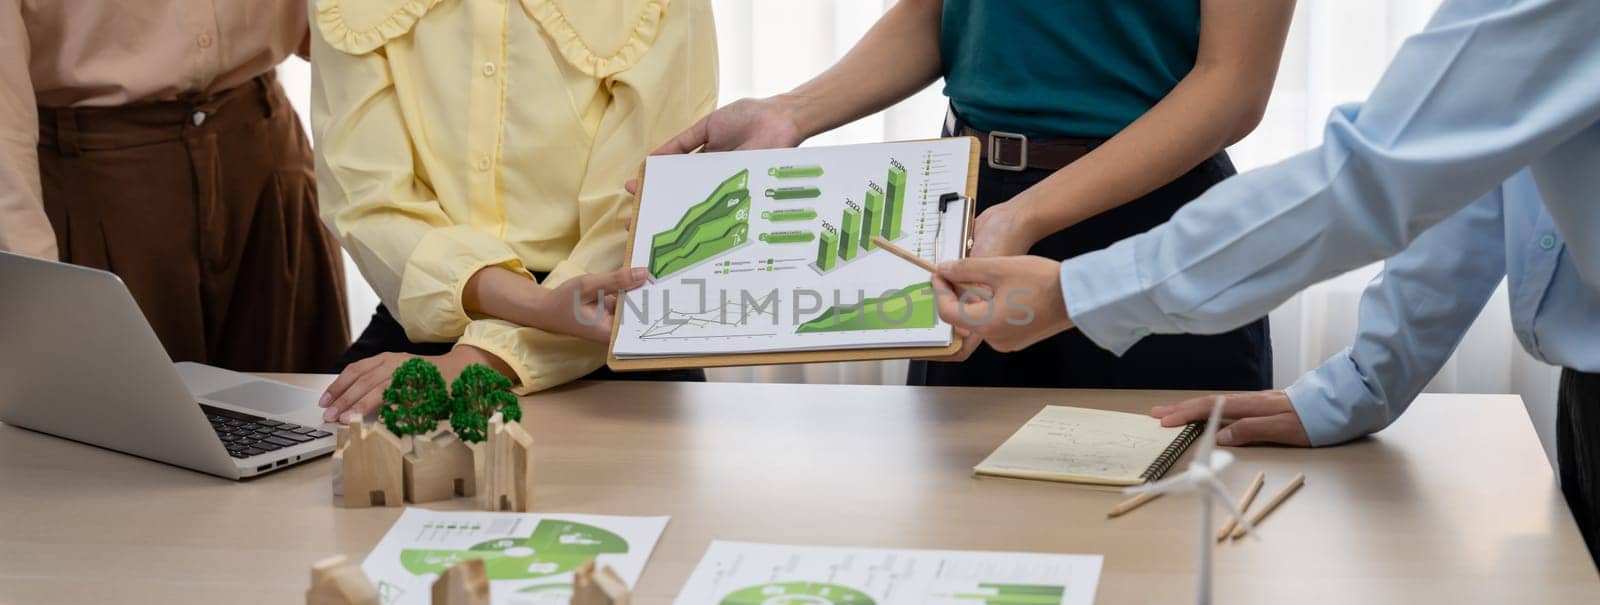 Professional business team presenting green business project by using graph to explain benefit of using renewable energy at modern meeting room. Closeup. Focus on hand. Delineation.